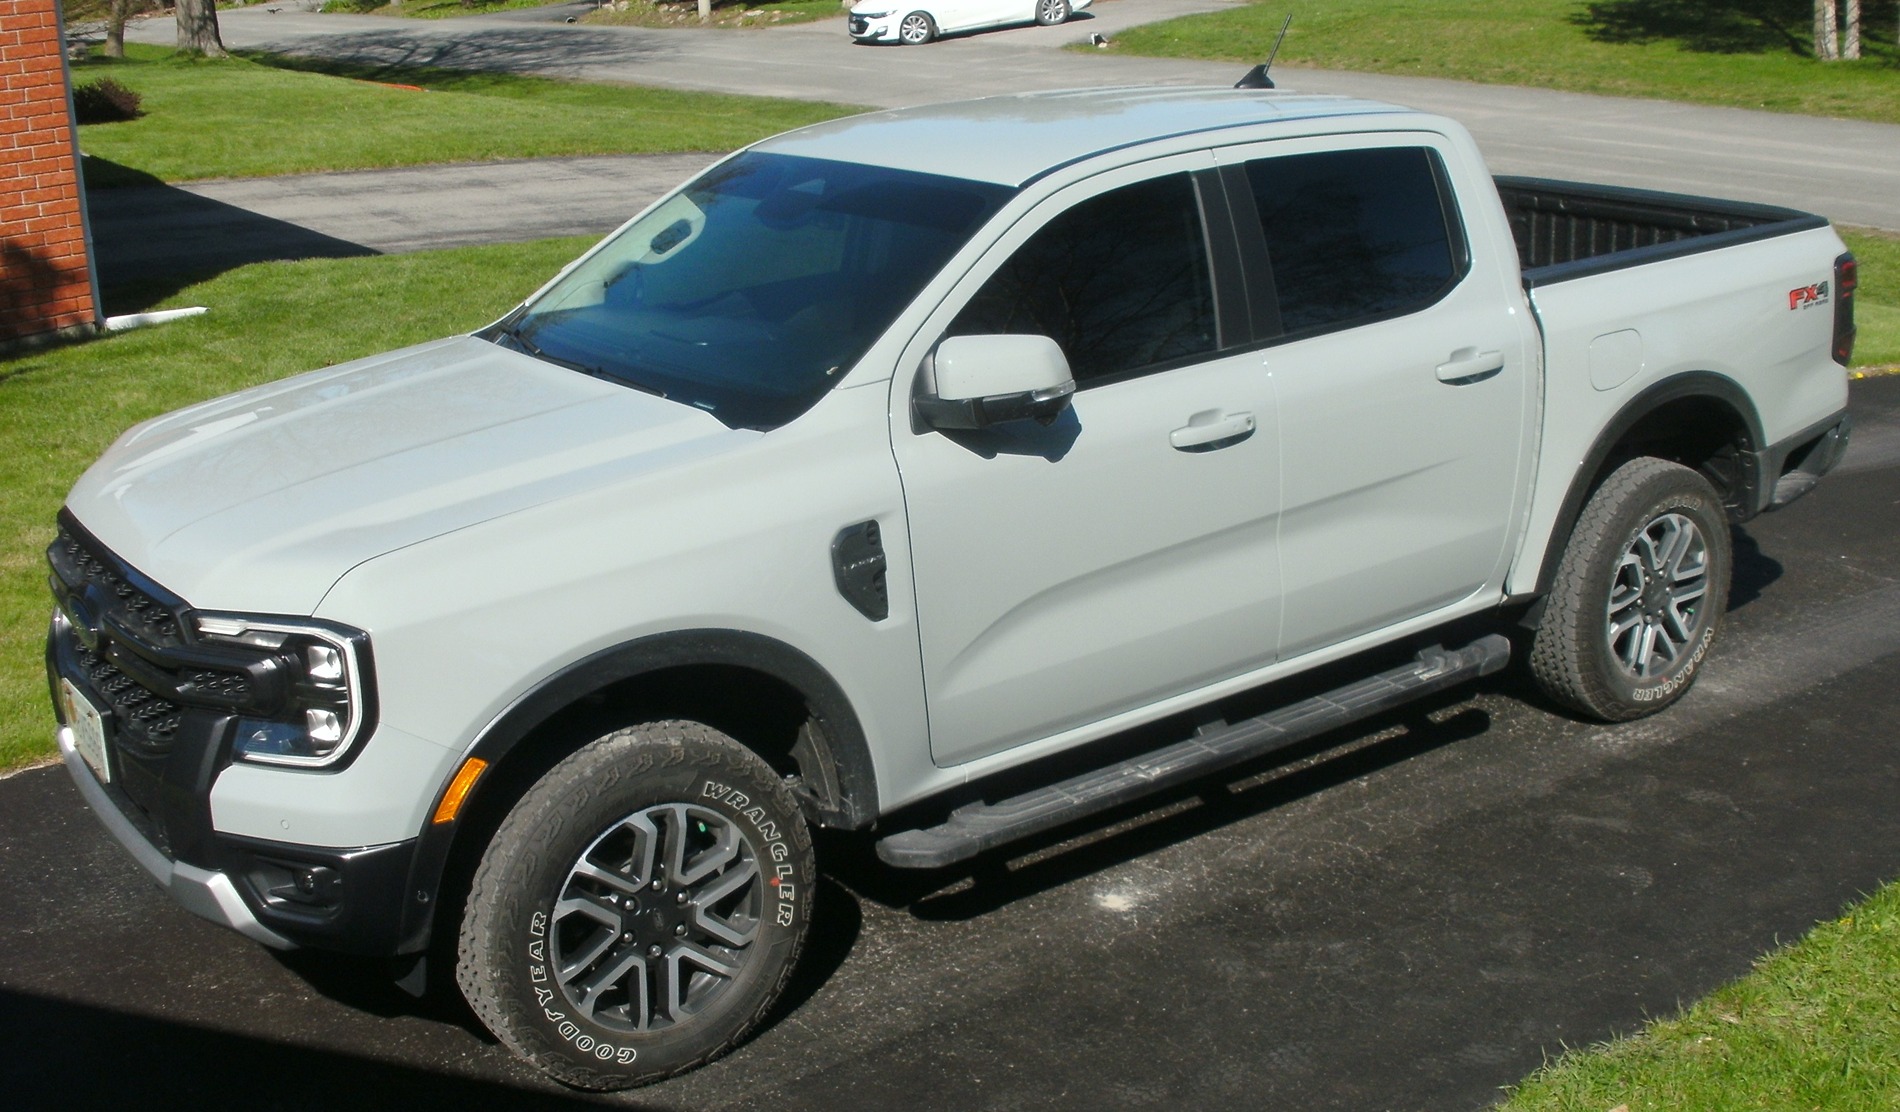 Ford Ranger Window Tinting -- 20% to match the rear window factory tint? Drv side view tint